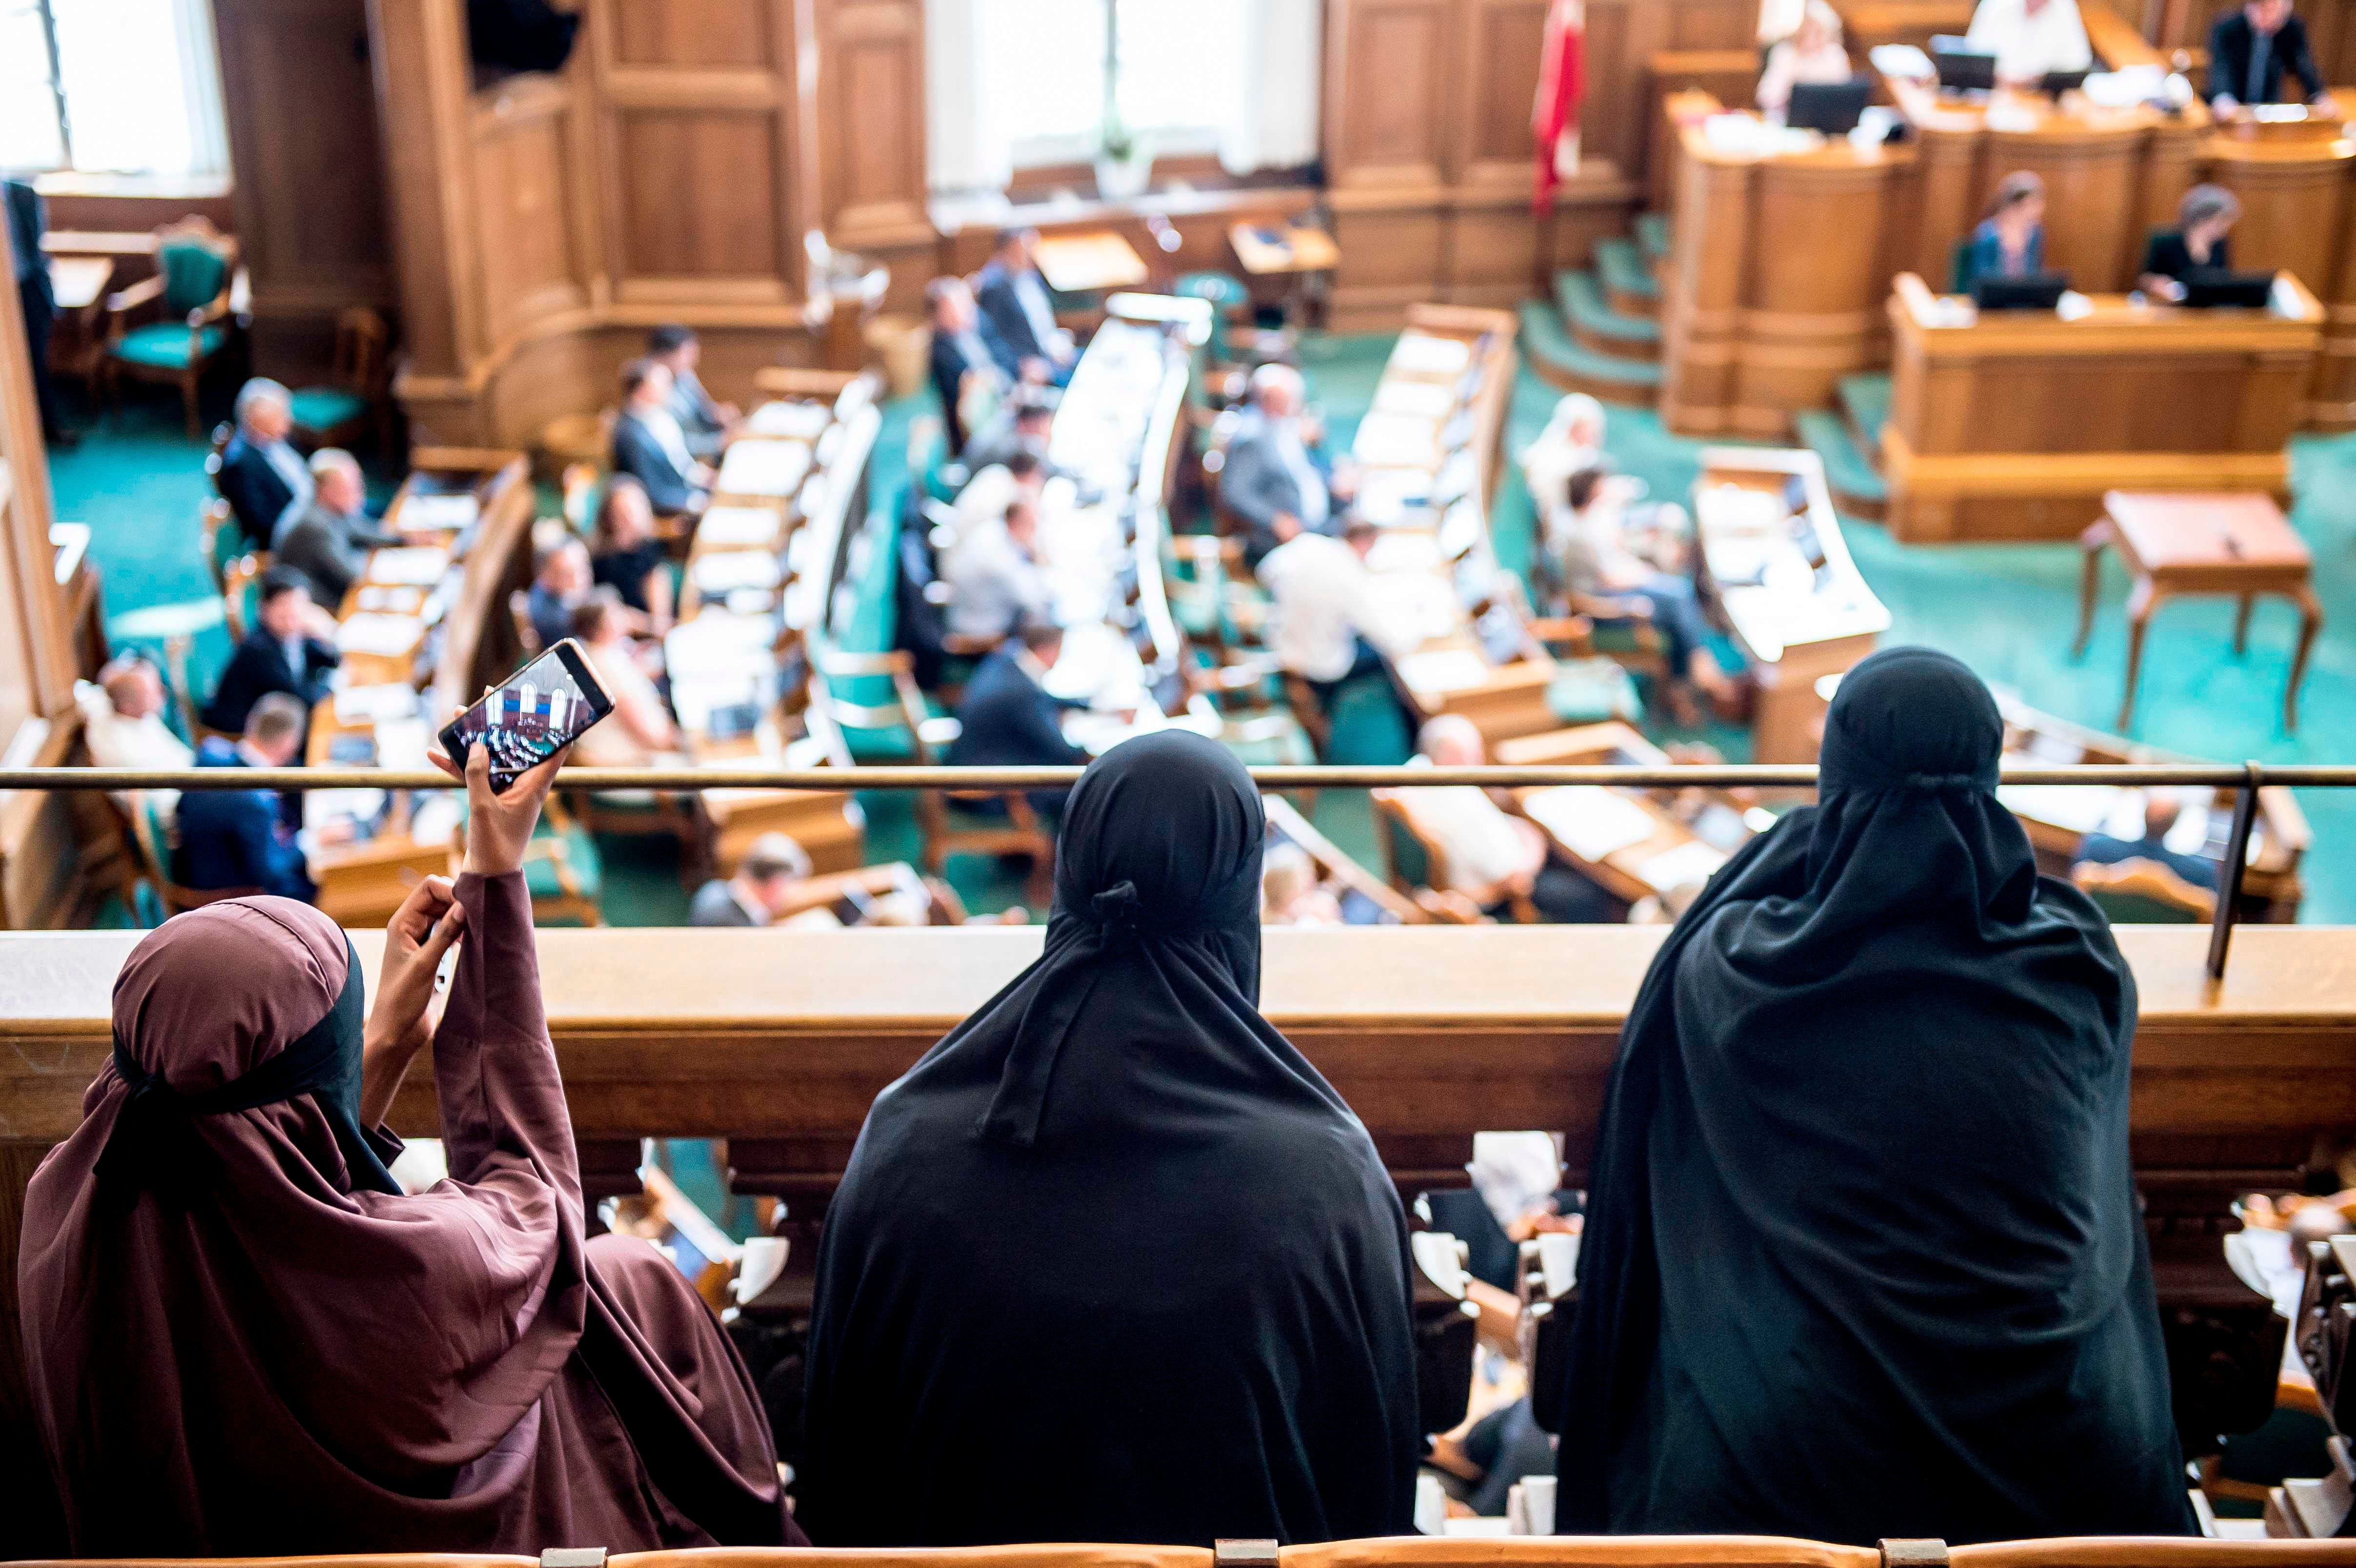 Women wearing niqab sit in the audience at the Danish Parliament in Copenhagen, Denmark, on May 31, 2018.   The Danish parliament on May 31,2018, passed a law banning the Islamic full-face veil in public spaces, becoming the latest European country to